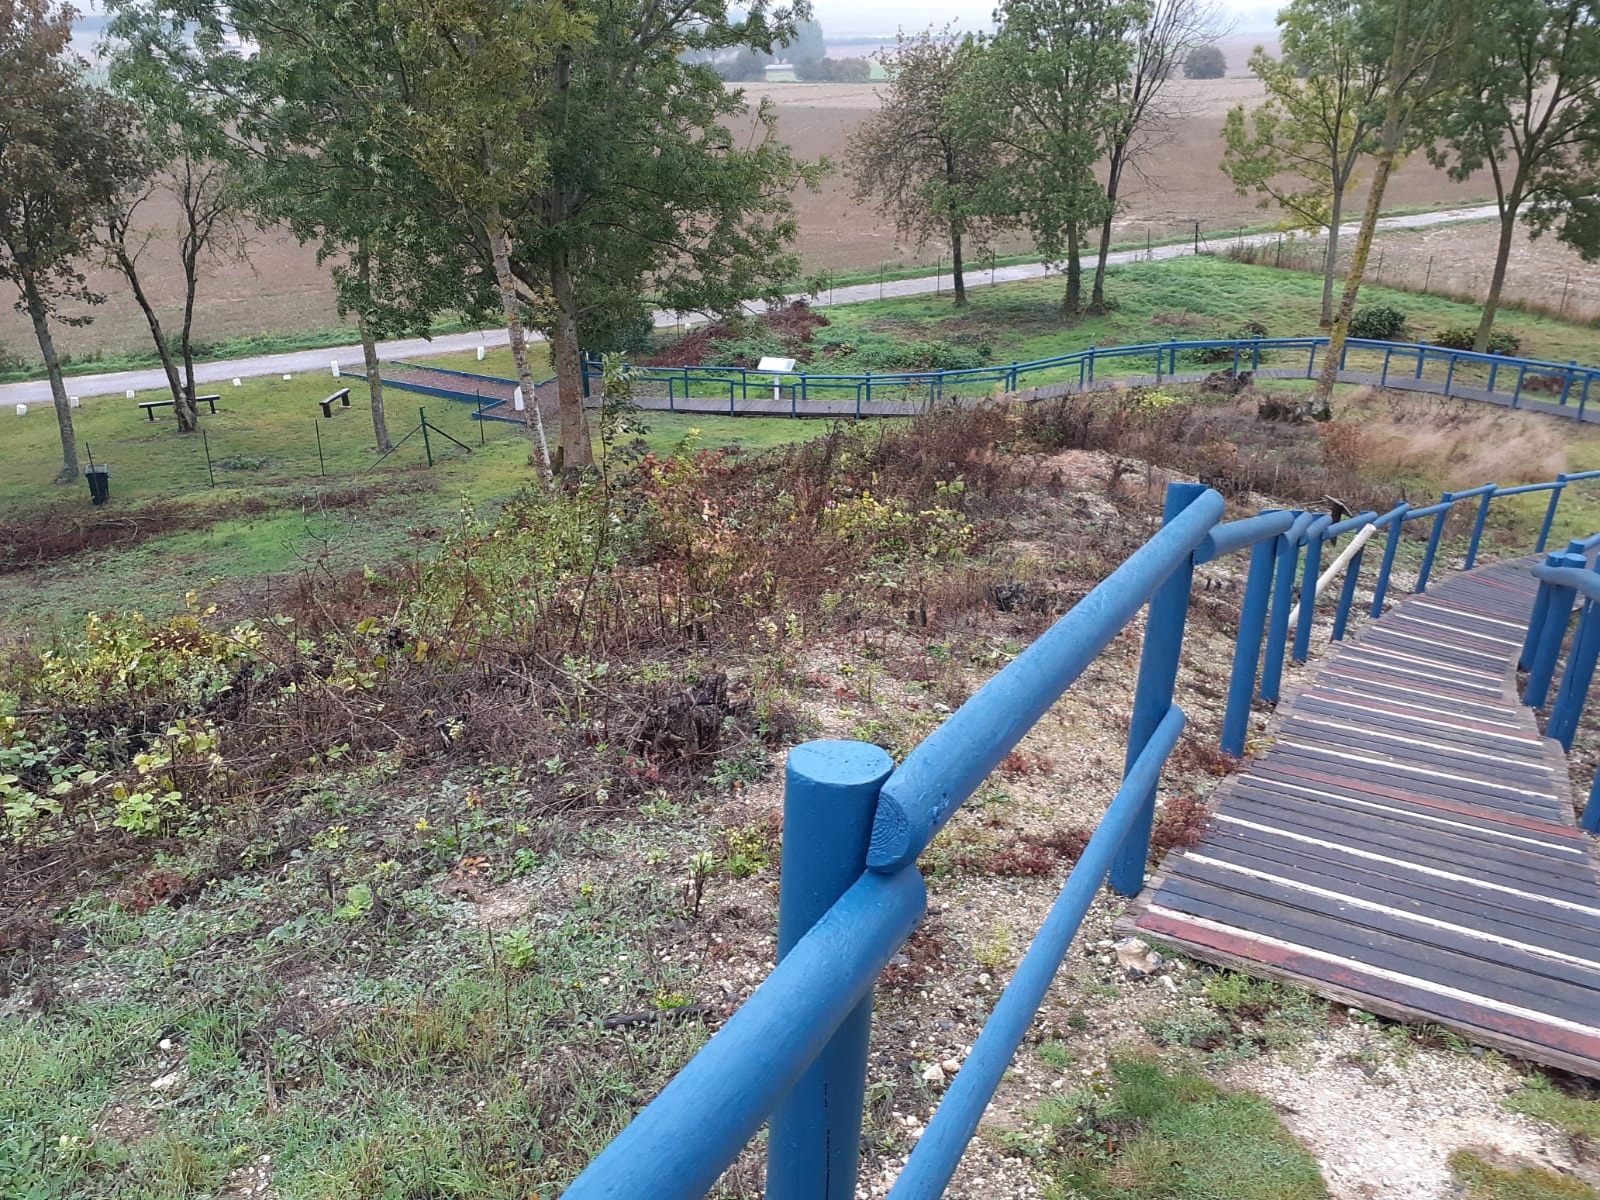 The top sections of the pathway shown here are undergoing changes to make them more accessible.